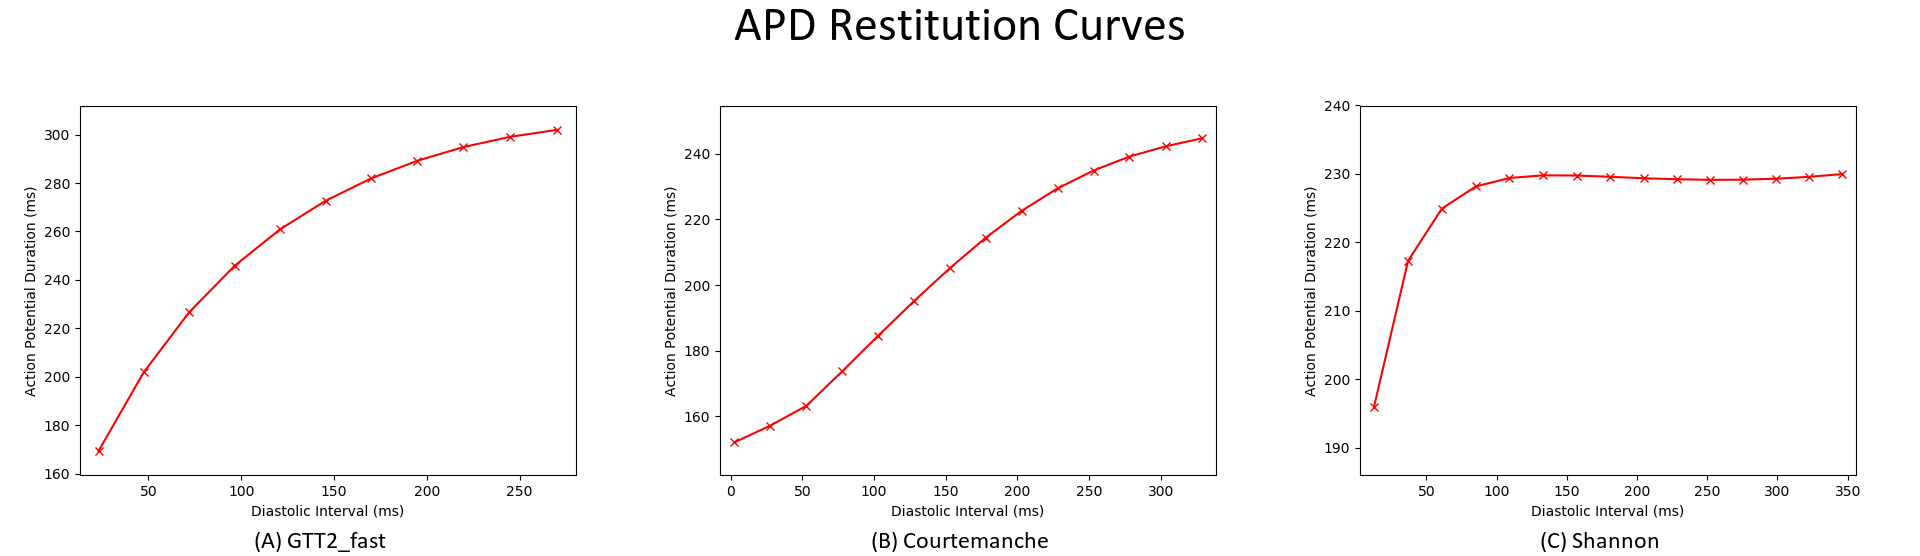 APD restitution